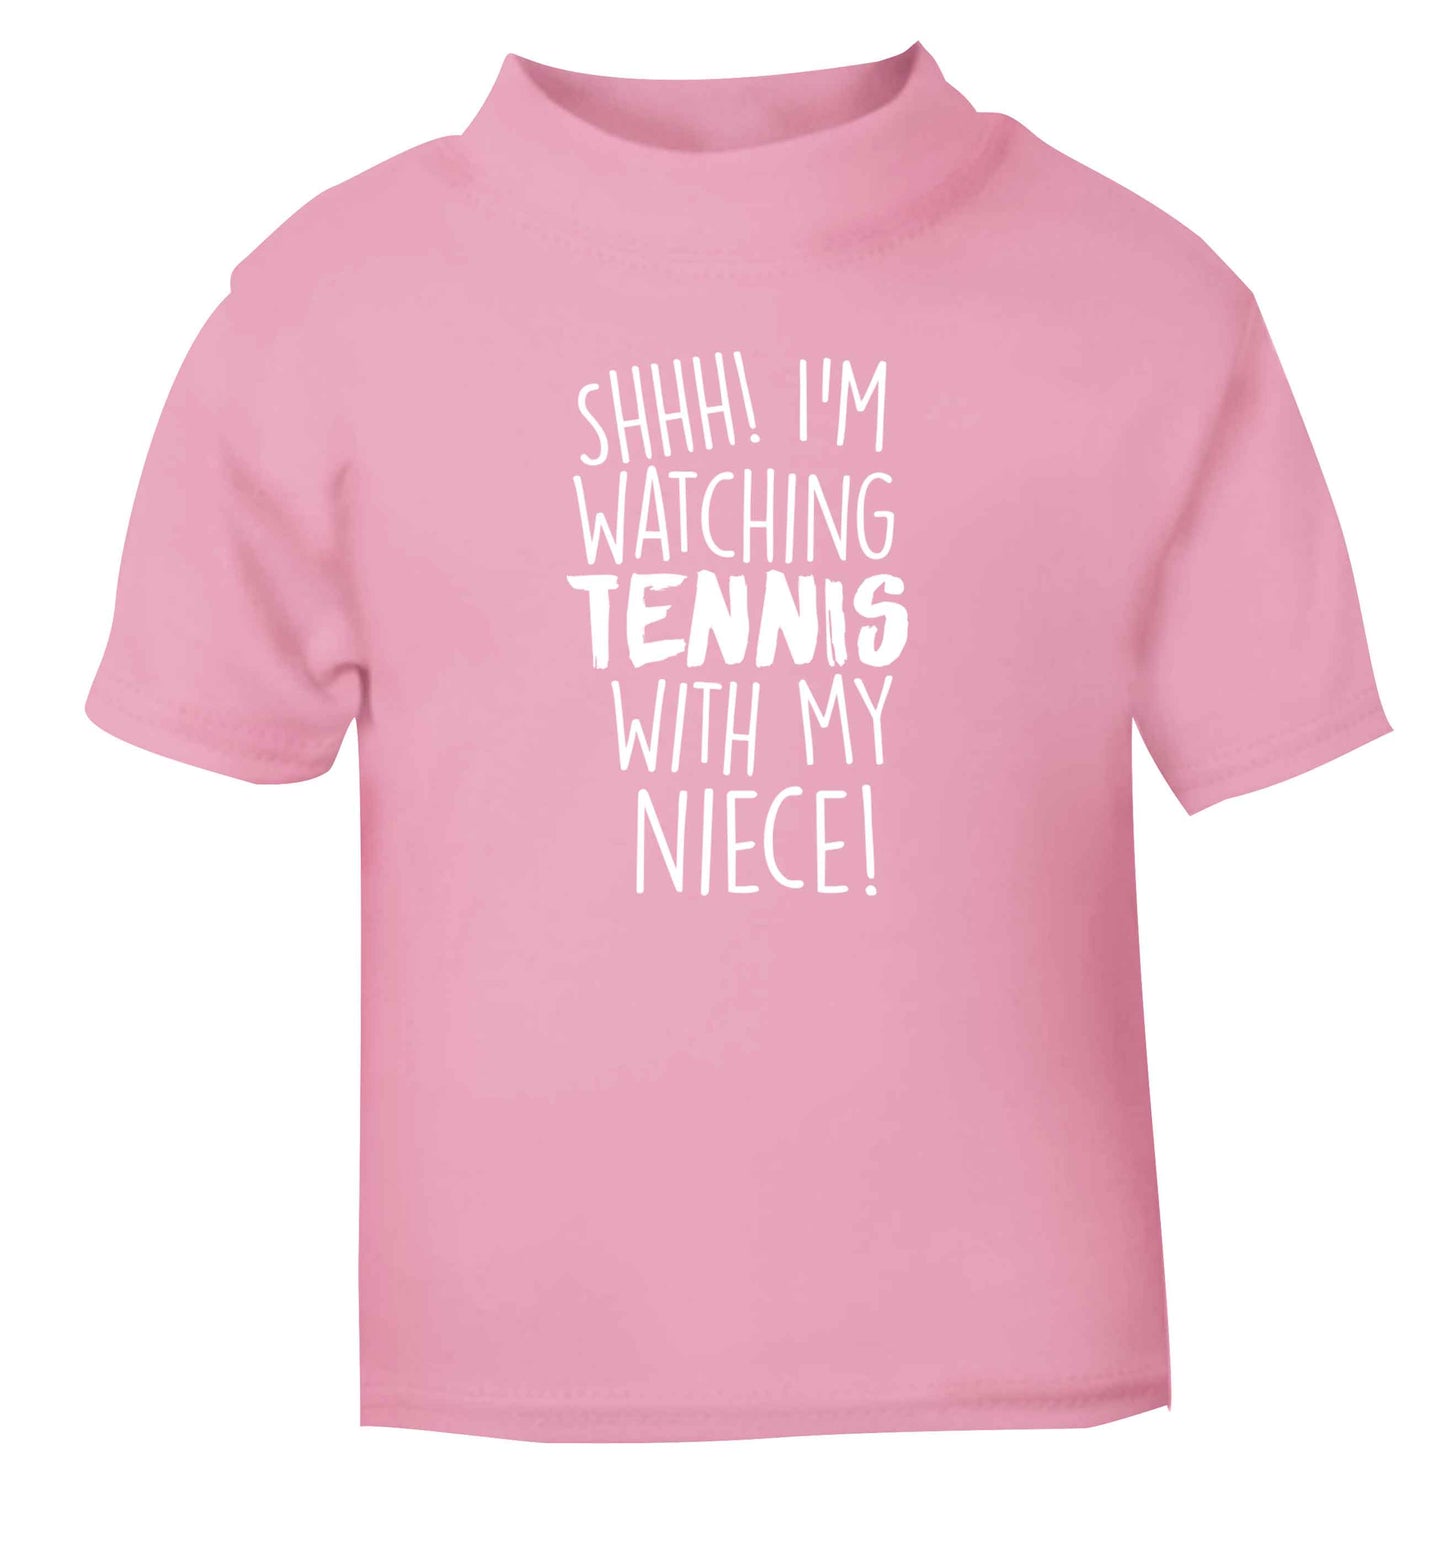 Shh! I'm watching tennis with my niece! light pink Baby Toddler Tshirt 2 Years